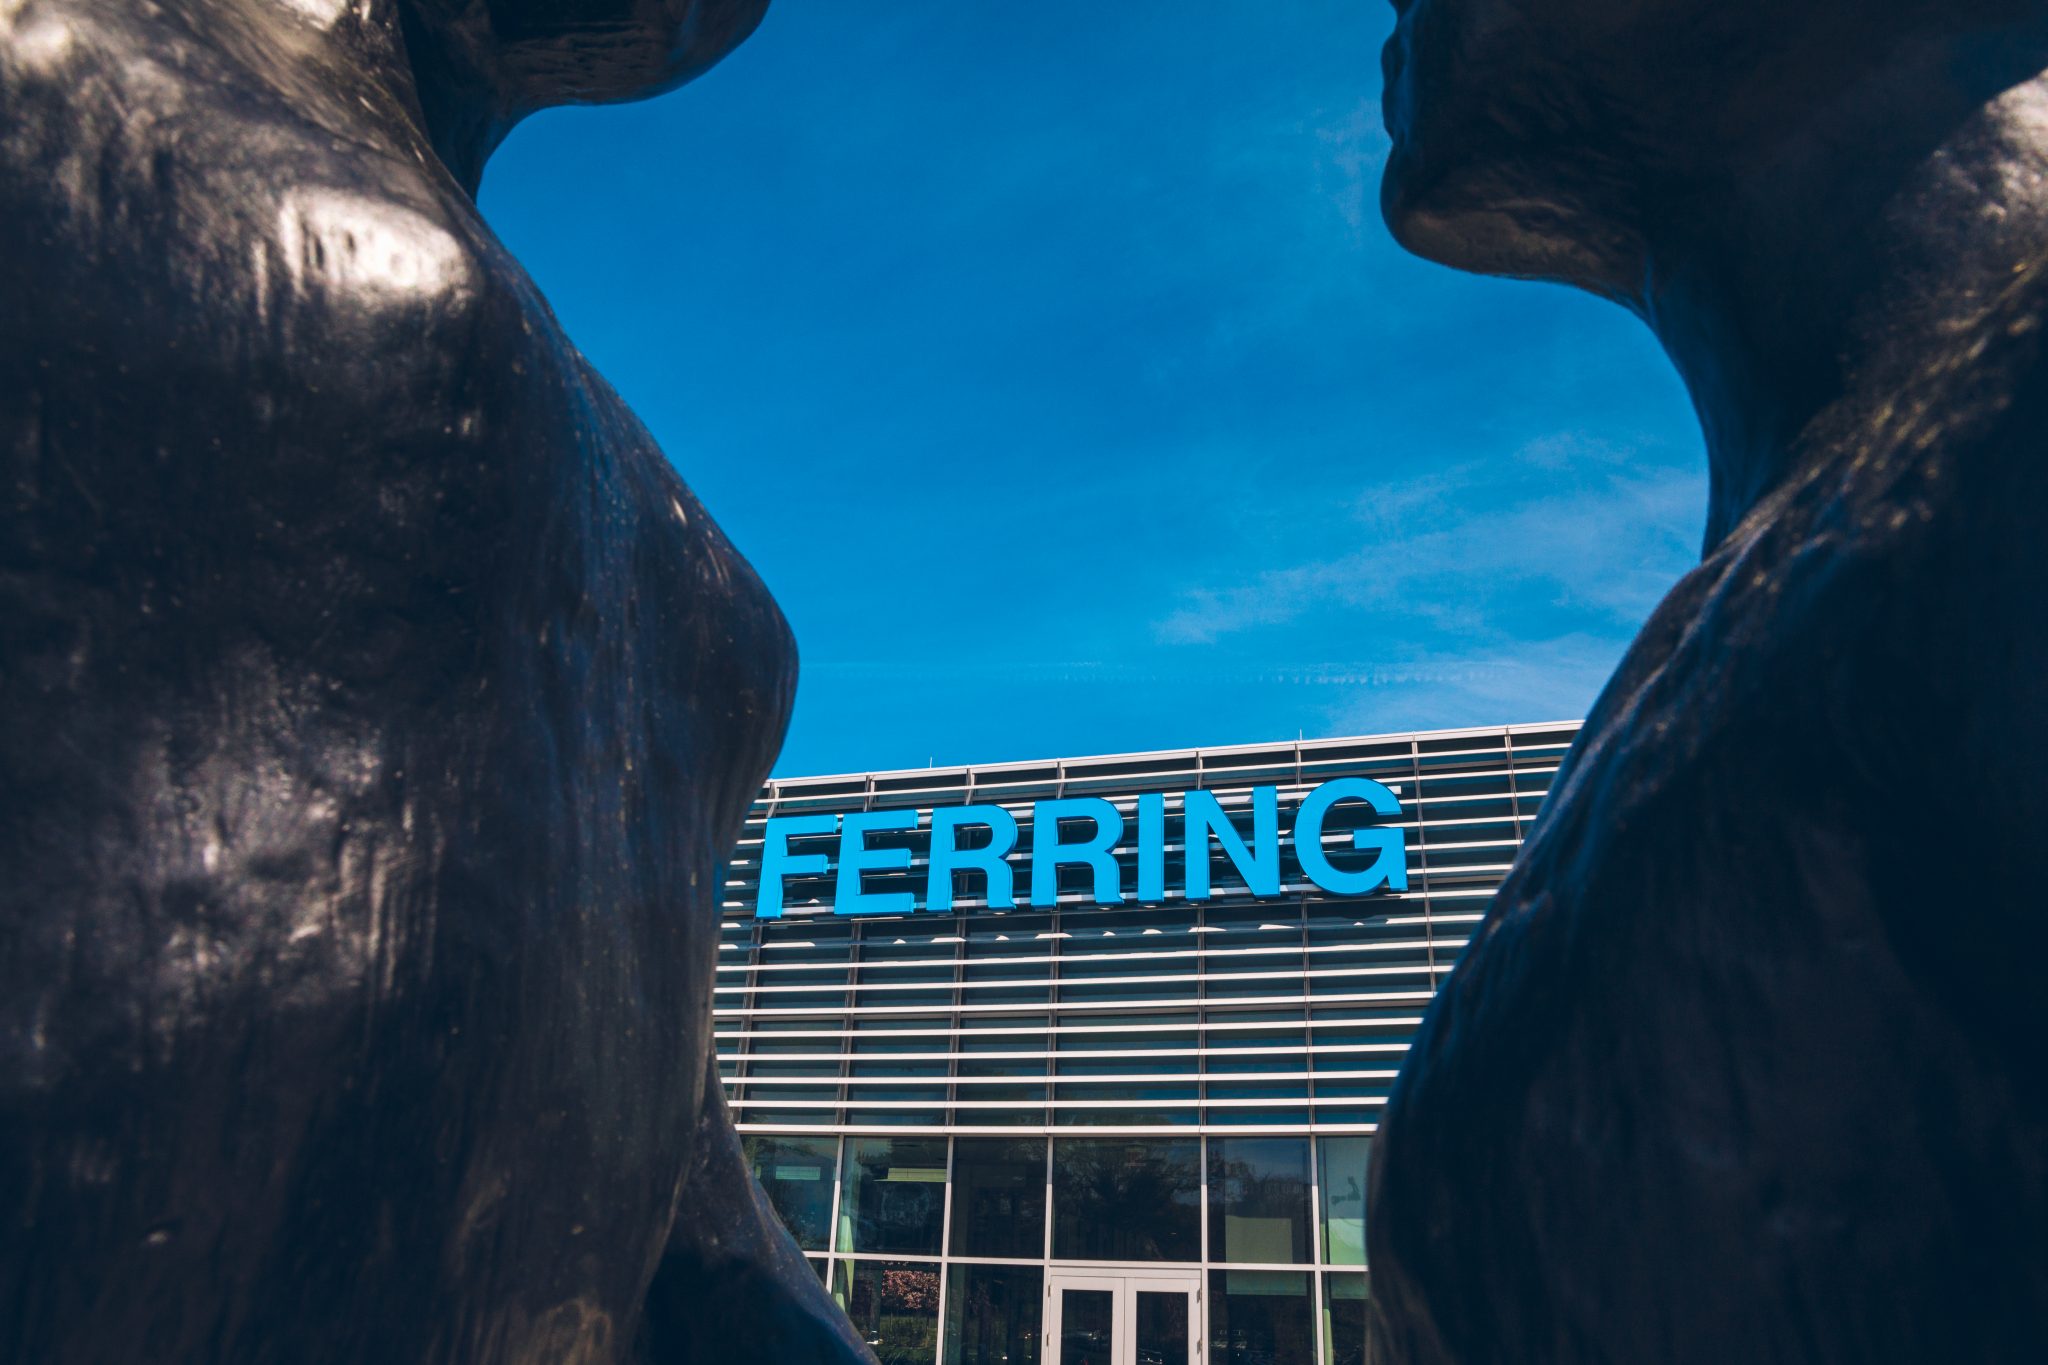 The Ferring Parsippany office building as seen from the perspective between the figures in a statue